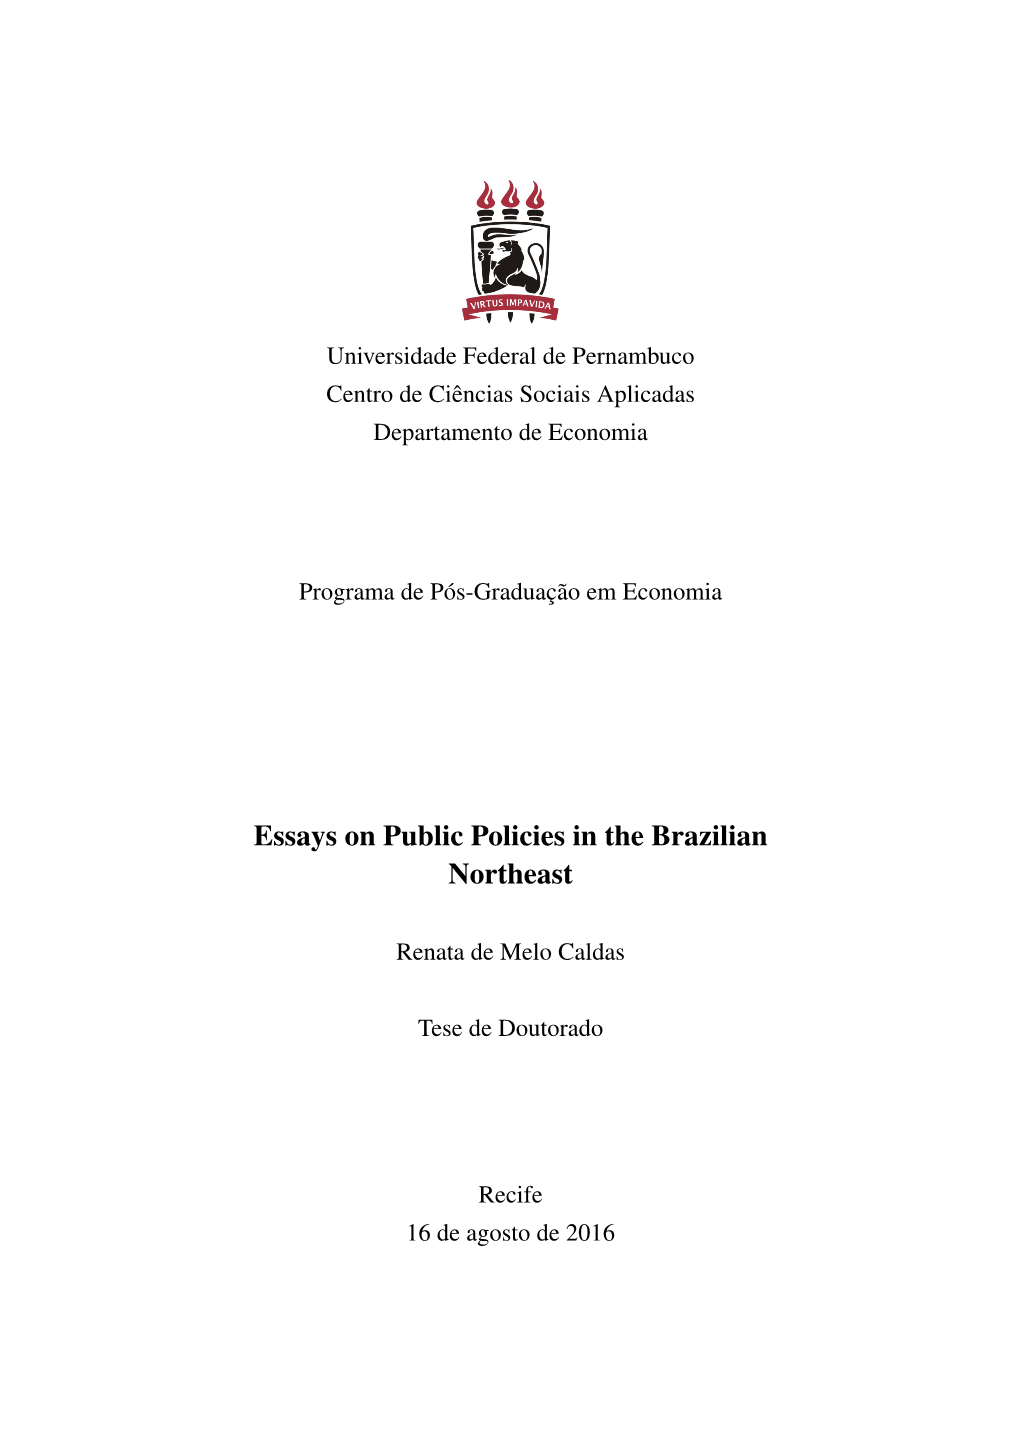 Essays on Public Policies in the Brazilian Northeast